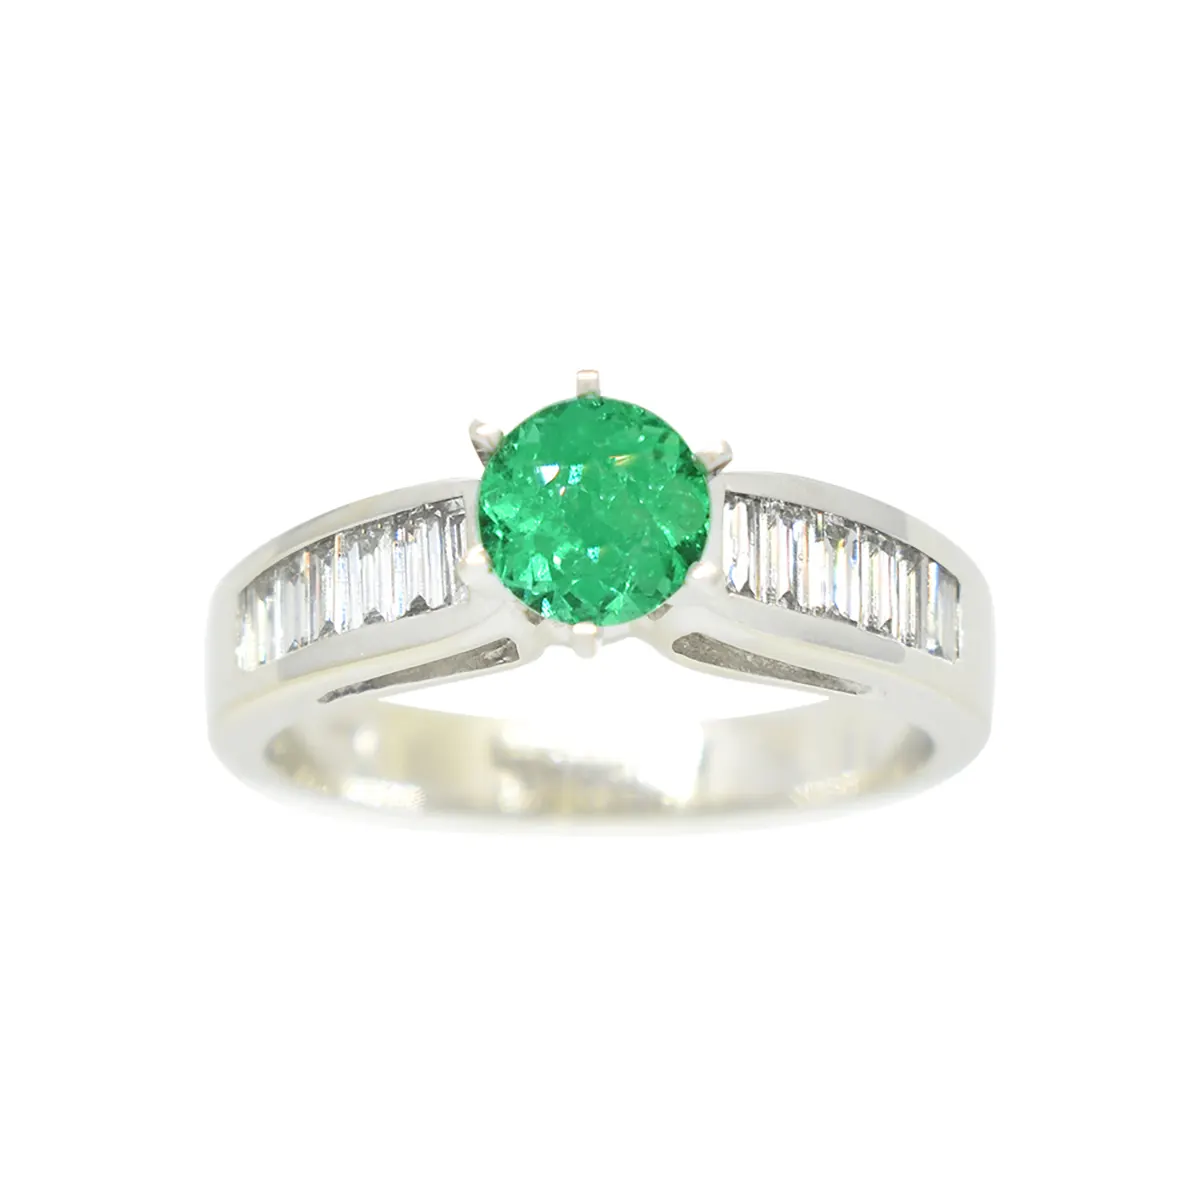 White Gold Emerald Engagement Ring With Round Natural Emerald and Baguette Cut Diamonds